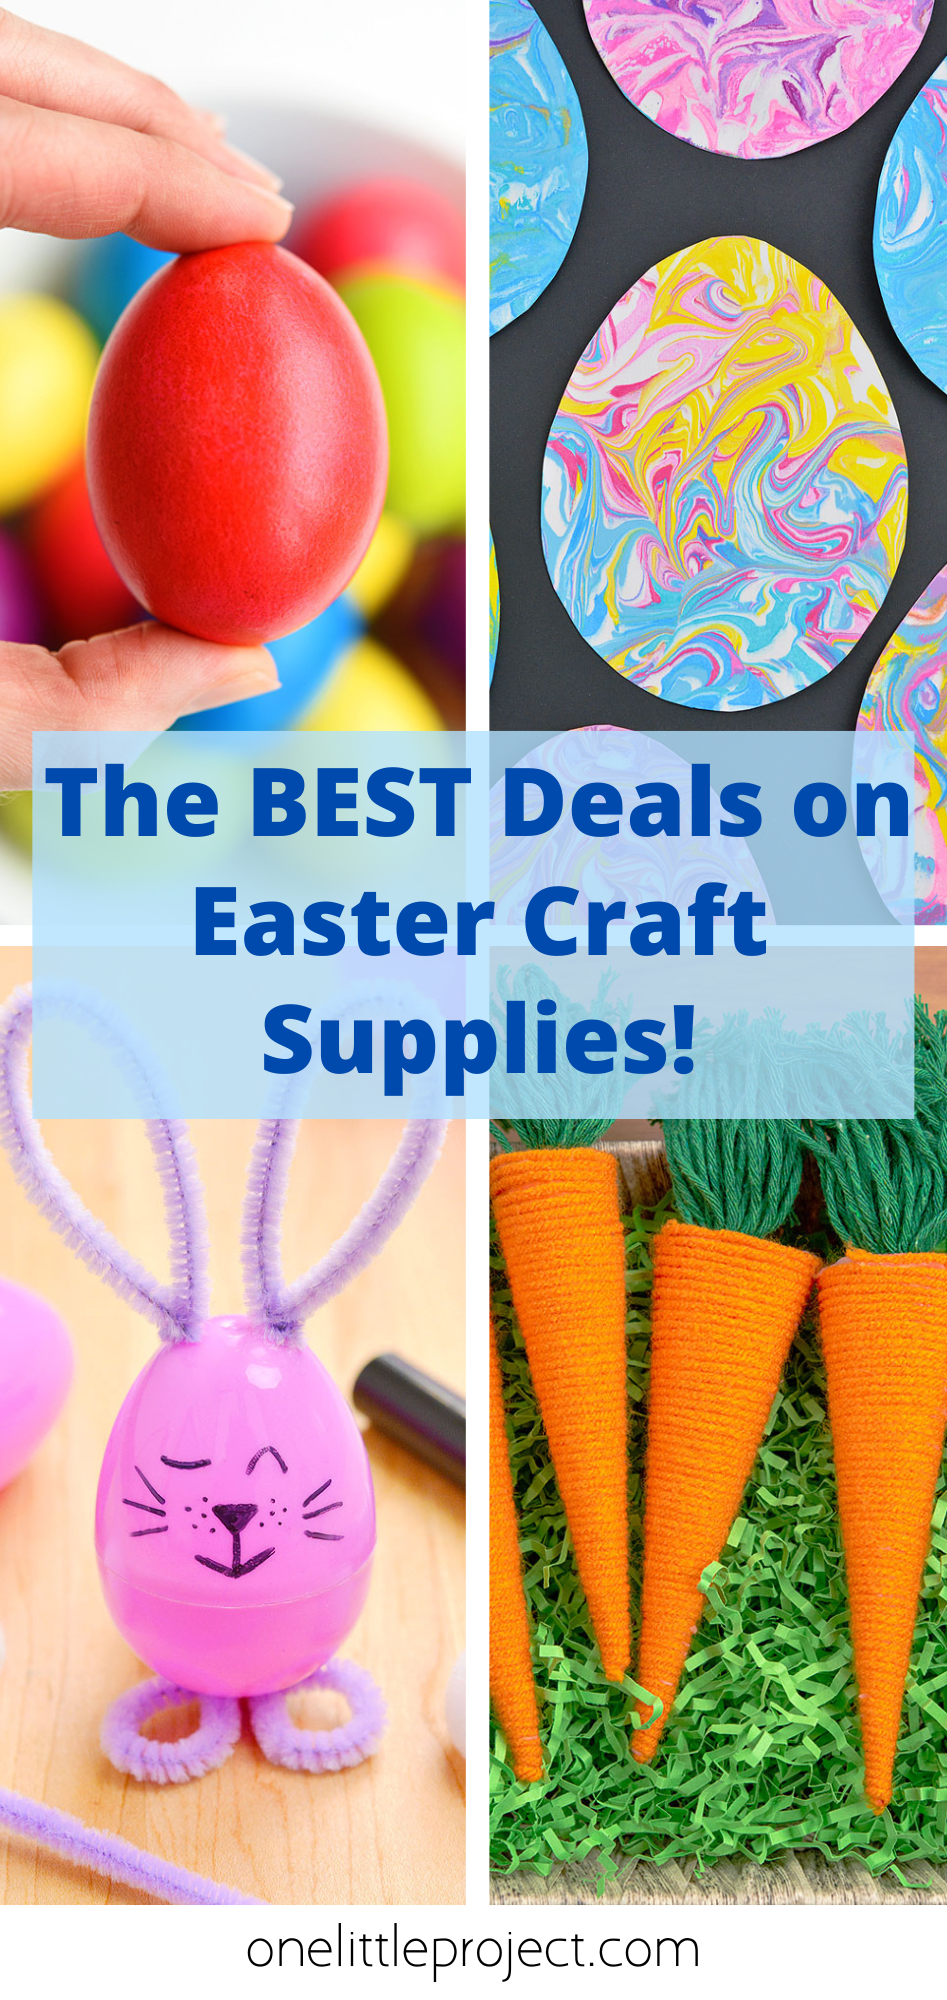 List of Easter craft supply deals